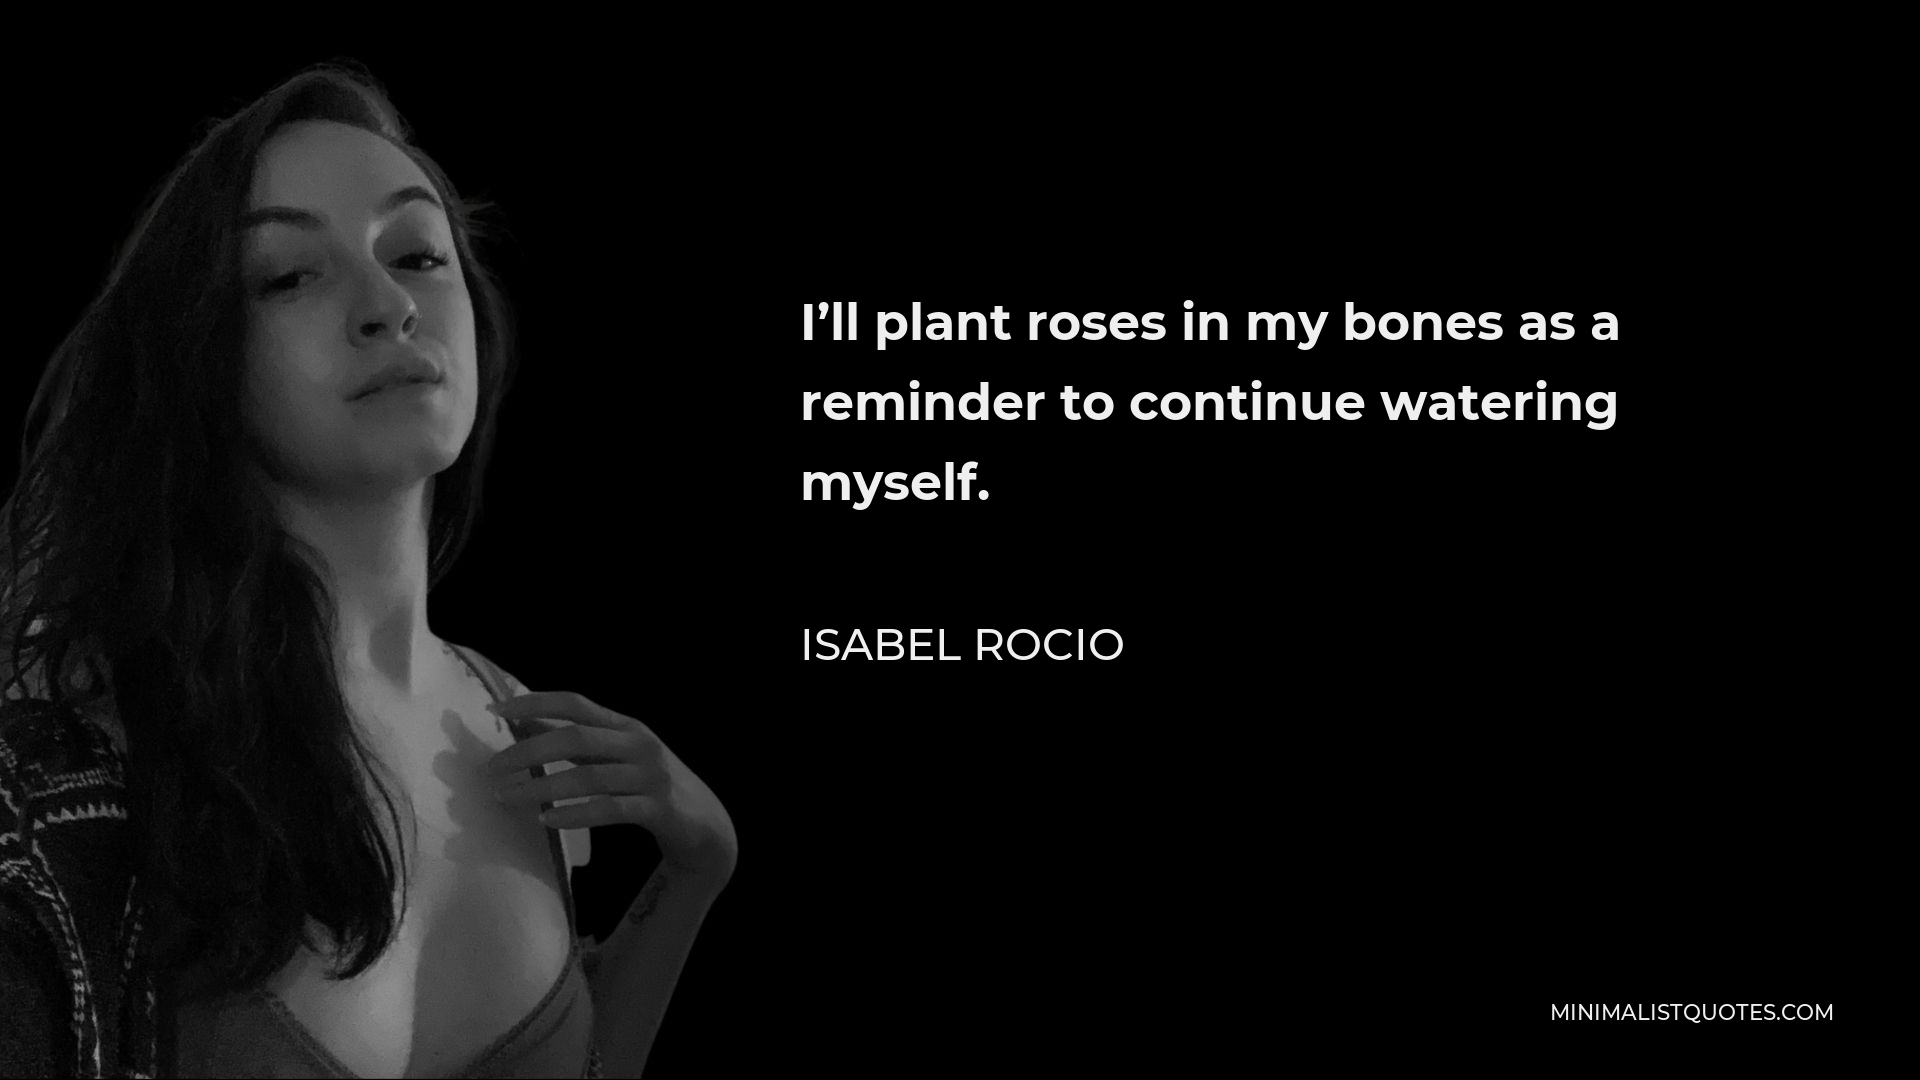 Isabel Rocio Quote - I’ll plant roses in my bones as a reminder to continue watering myself.